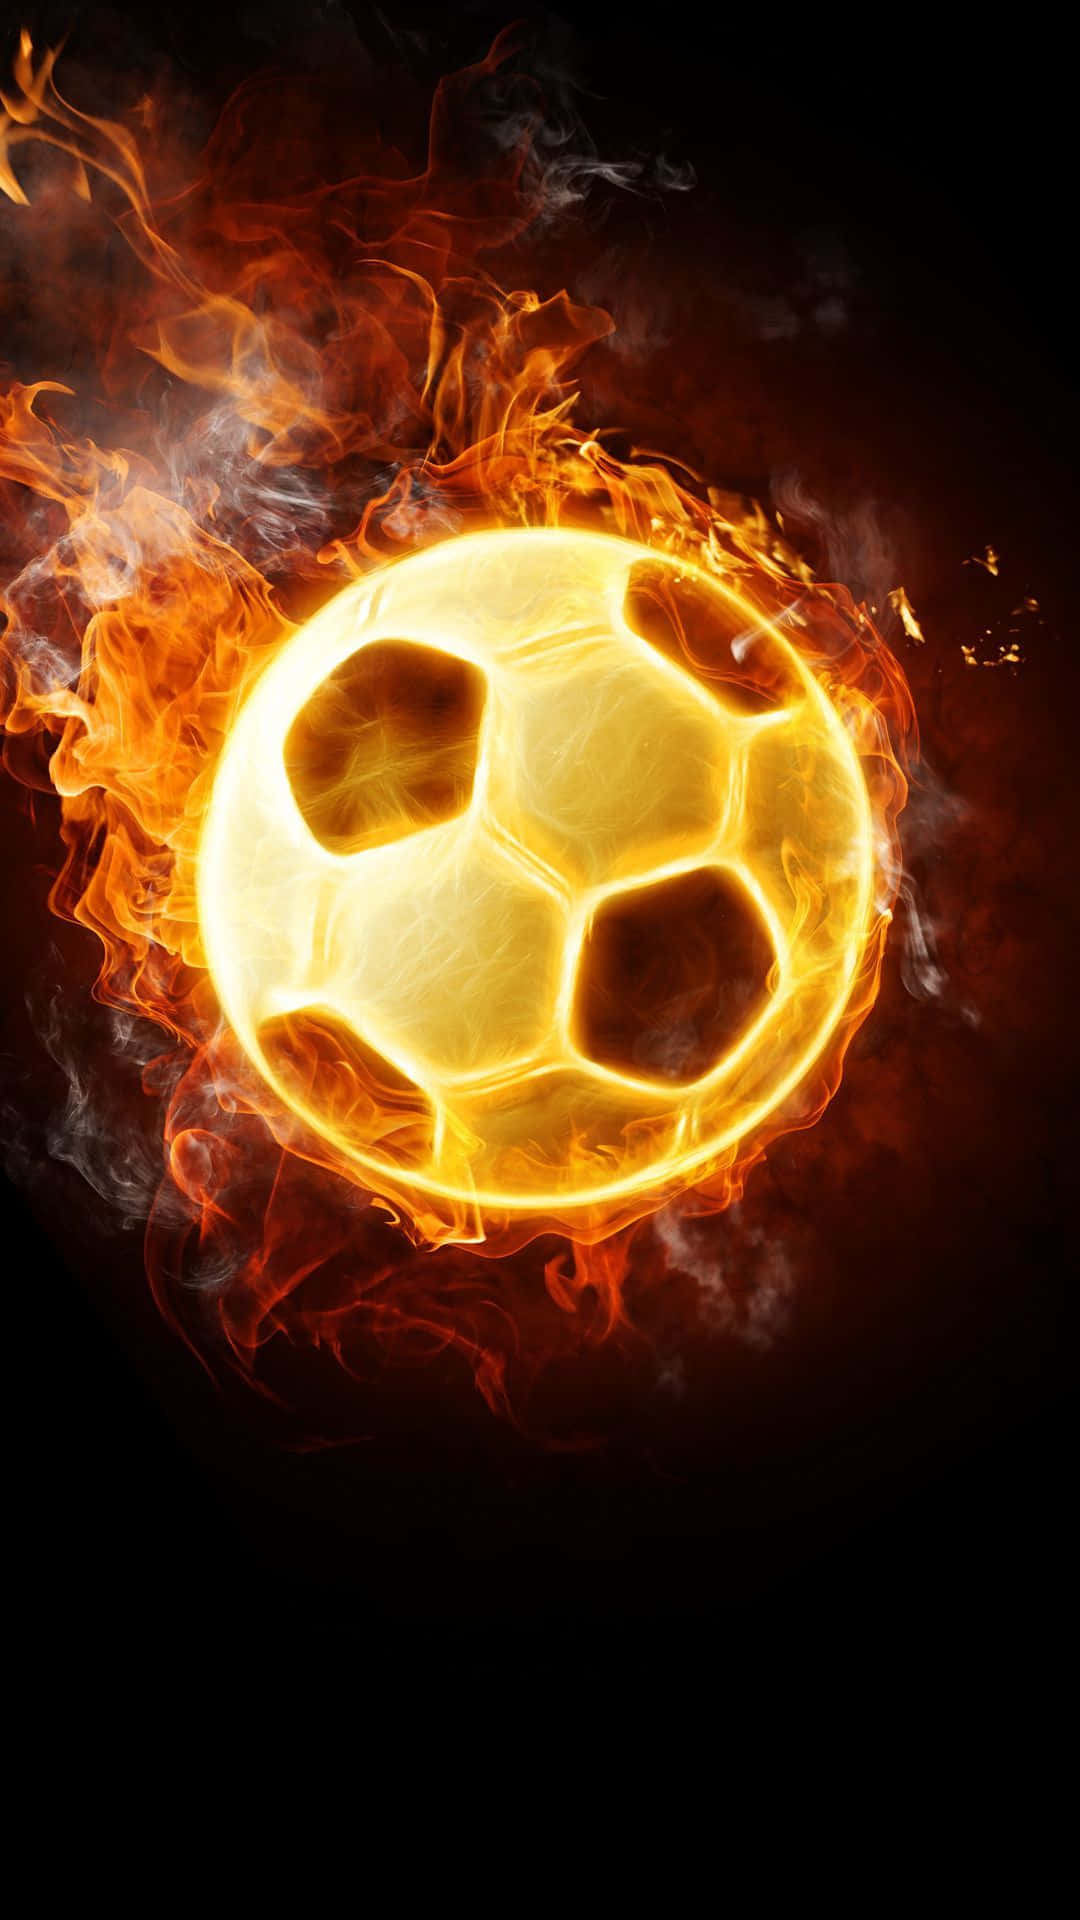 Blaze your way to the top of the league with Football On Fire! Wallpaper